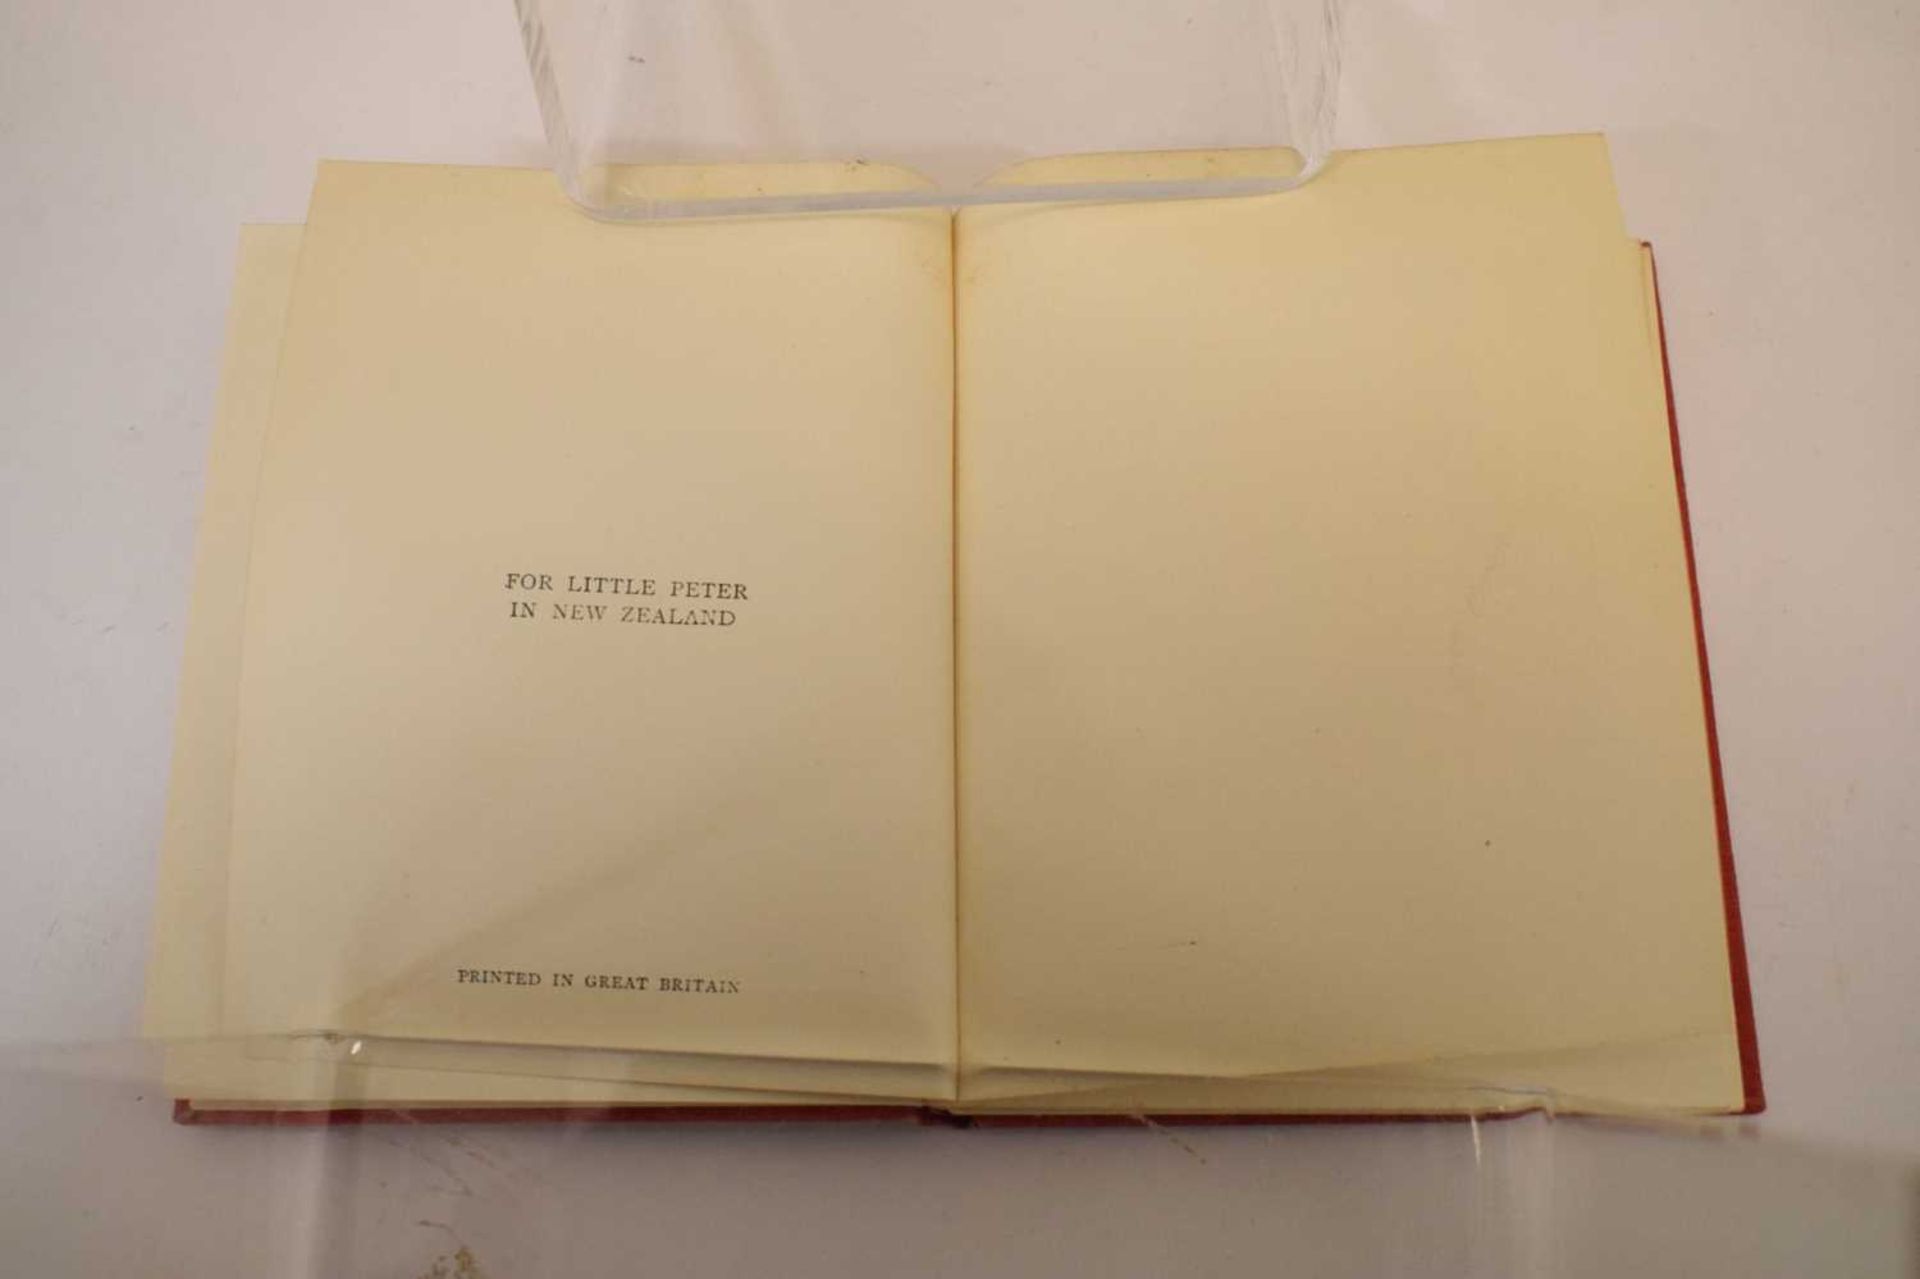 Potter, Beatrix - 'Cecily Parsley's Nursery Rhymes' - First edition - Image 10 of 23